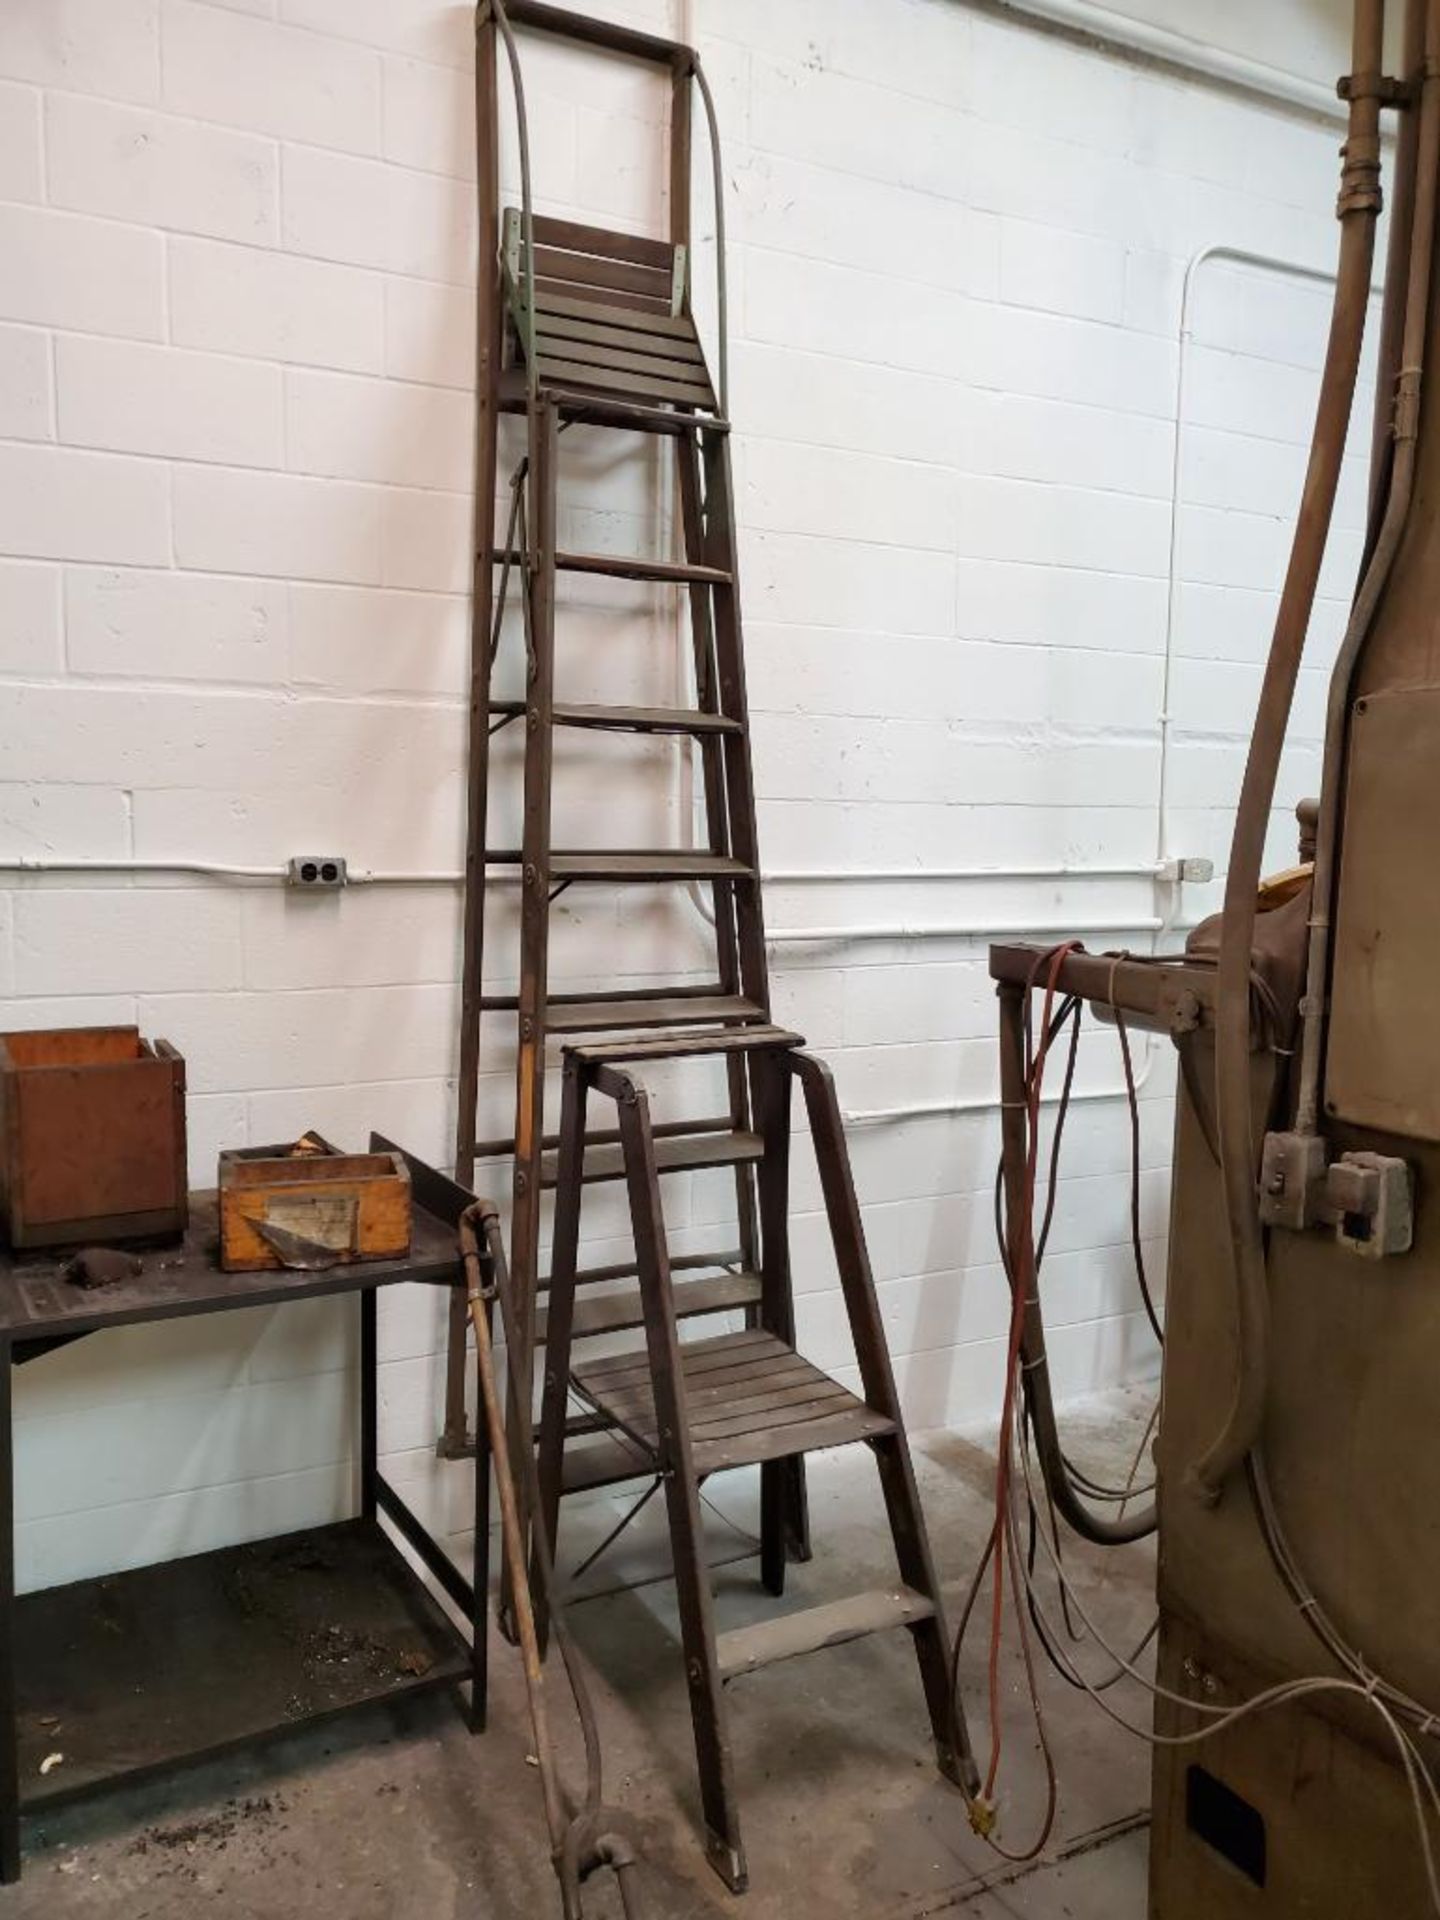 (2) Fiberglass Step Ladders, 6'/4', Aluminum Ladder from Extension, Wood Step Ladders - Image 6 of 6